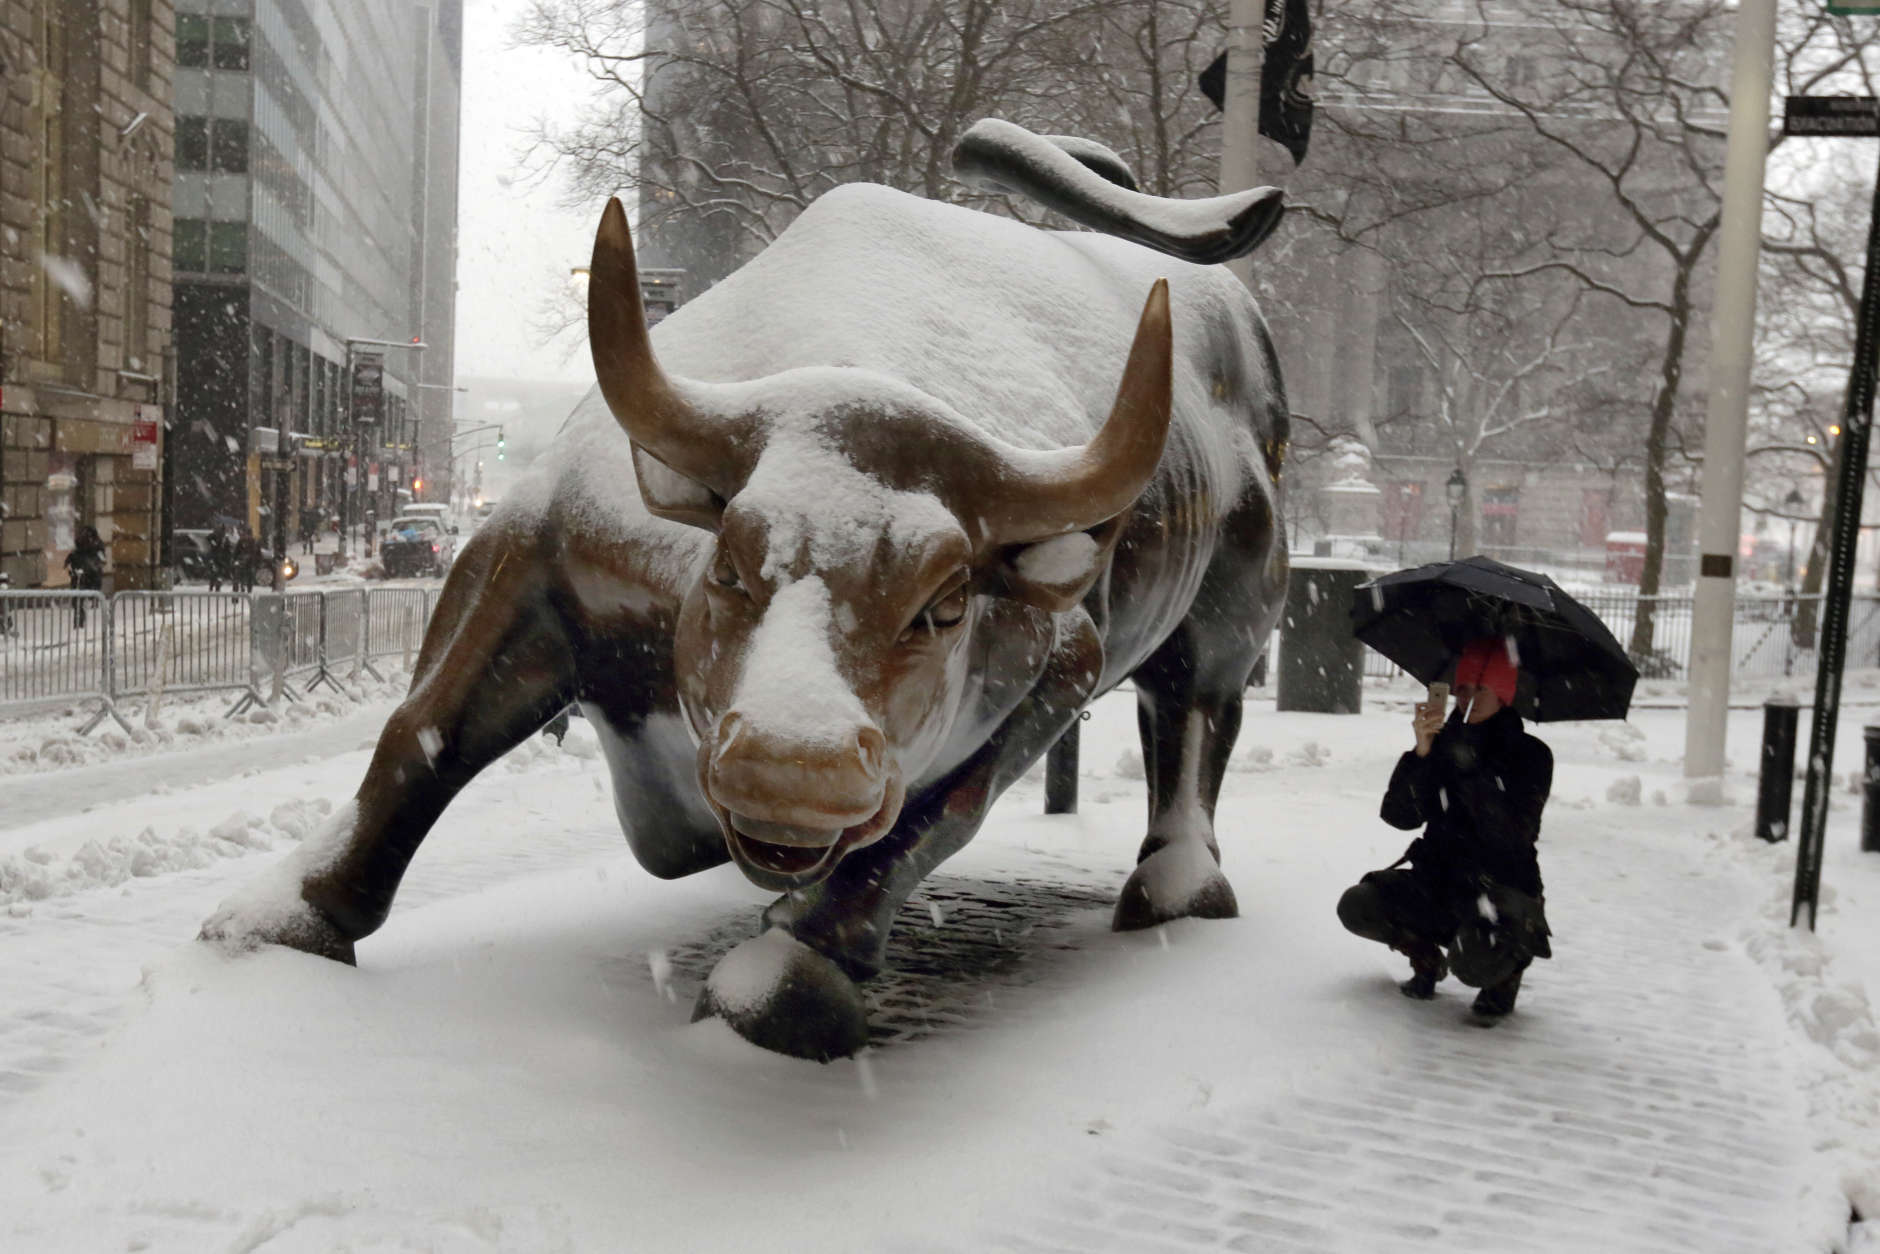 The "Charging Bull" statue is covered in snow in New York's Financial District, Tuesday, March 14, 2017. New York Gov. Andrew Cuomo has declared a state of emergency Tuesday for all of New York's 62 counties, including New York City's five boroughs. (AP Photo/Richard Drew)